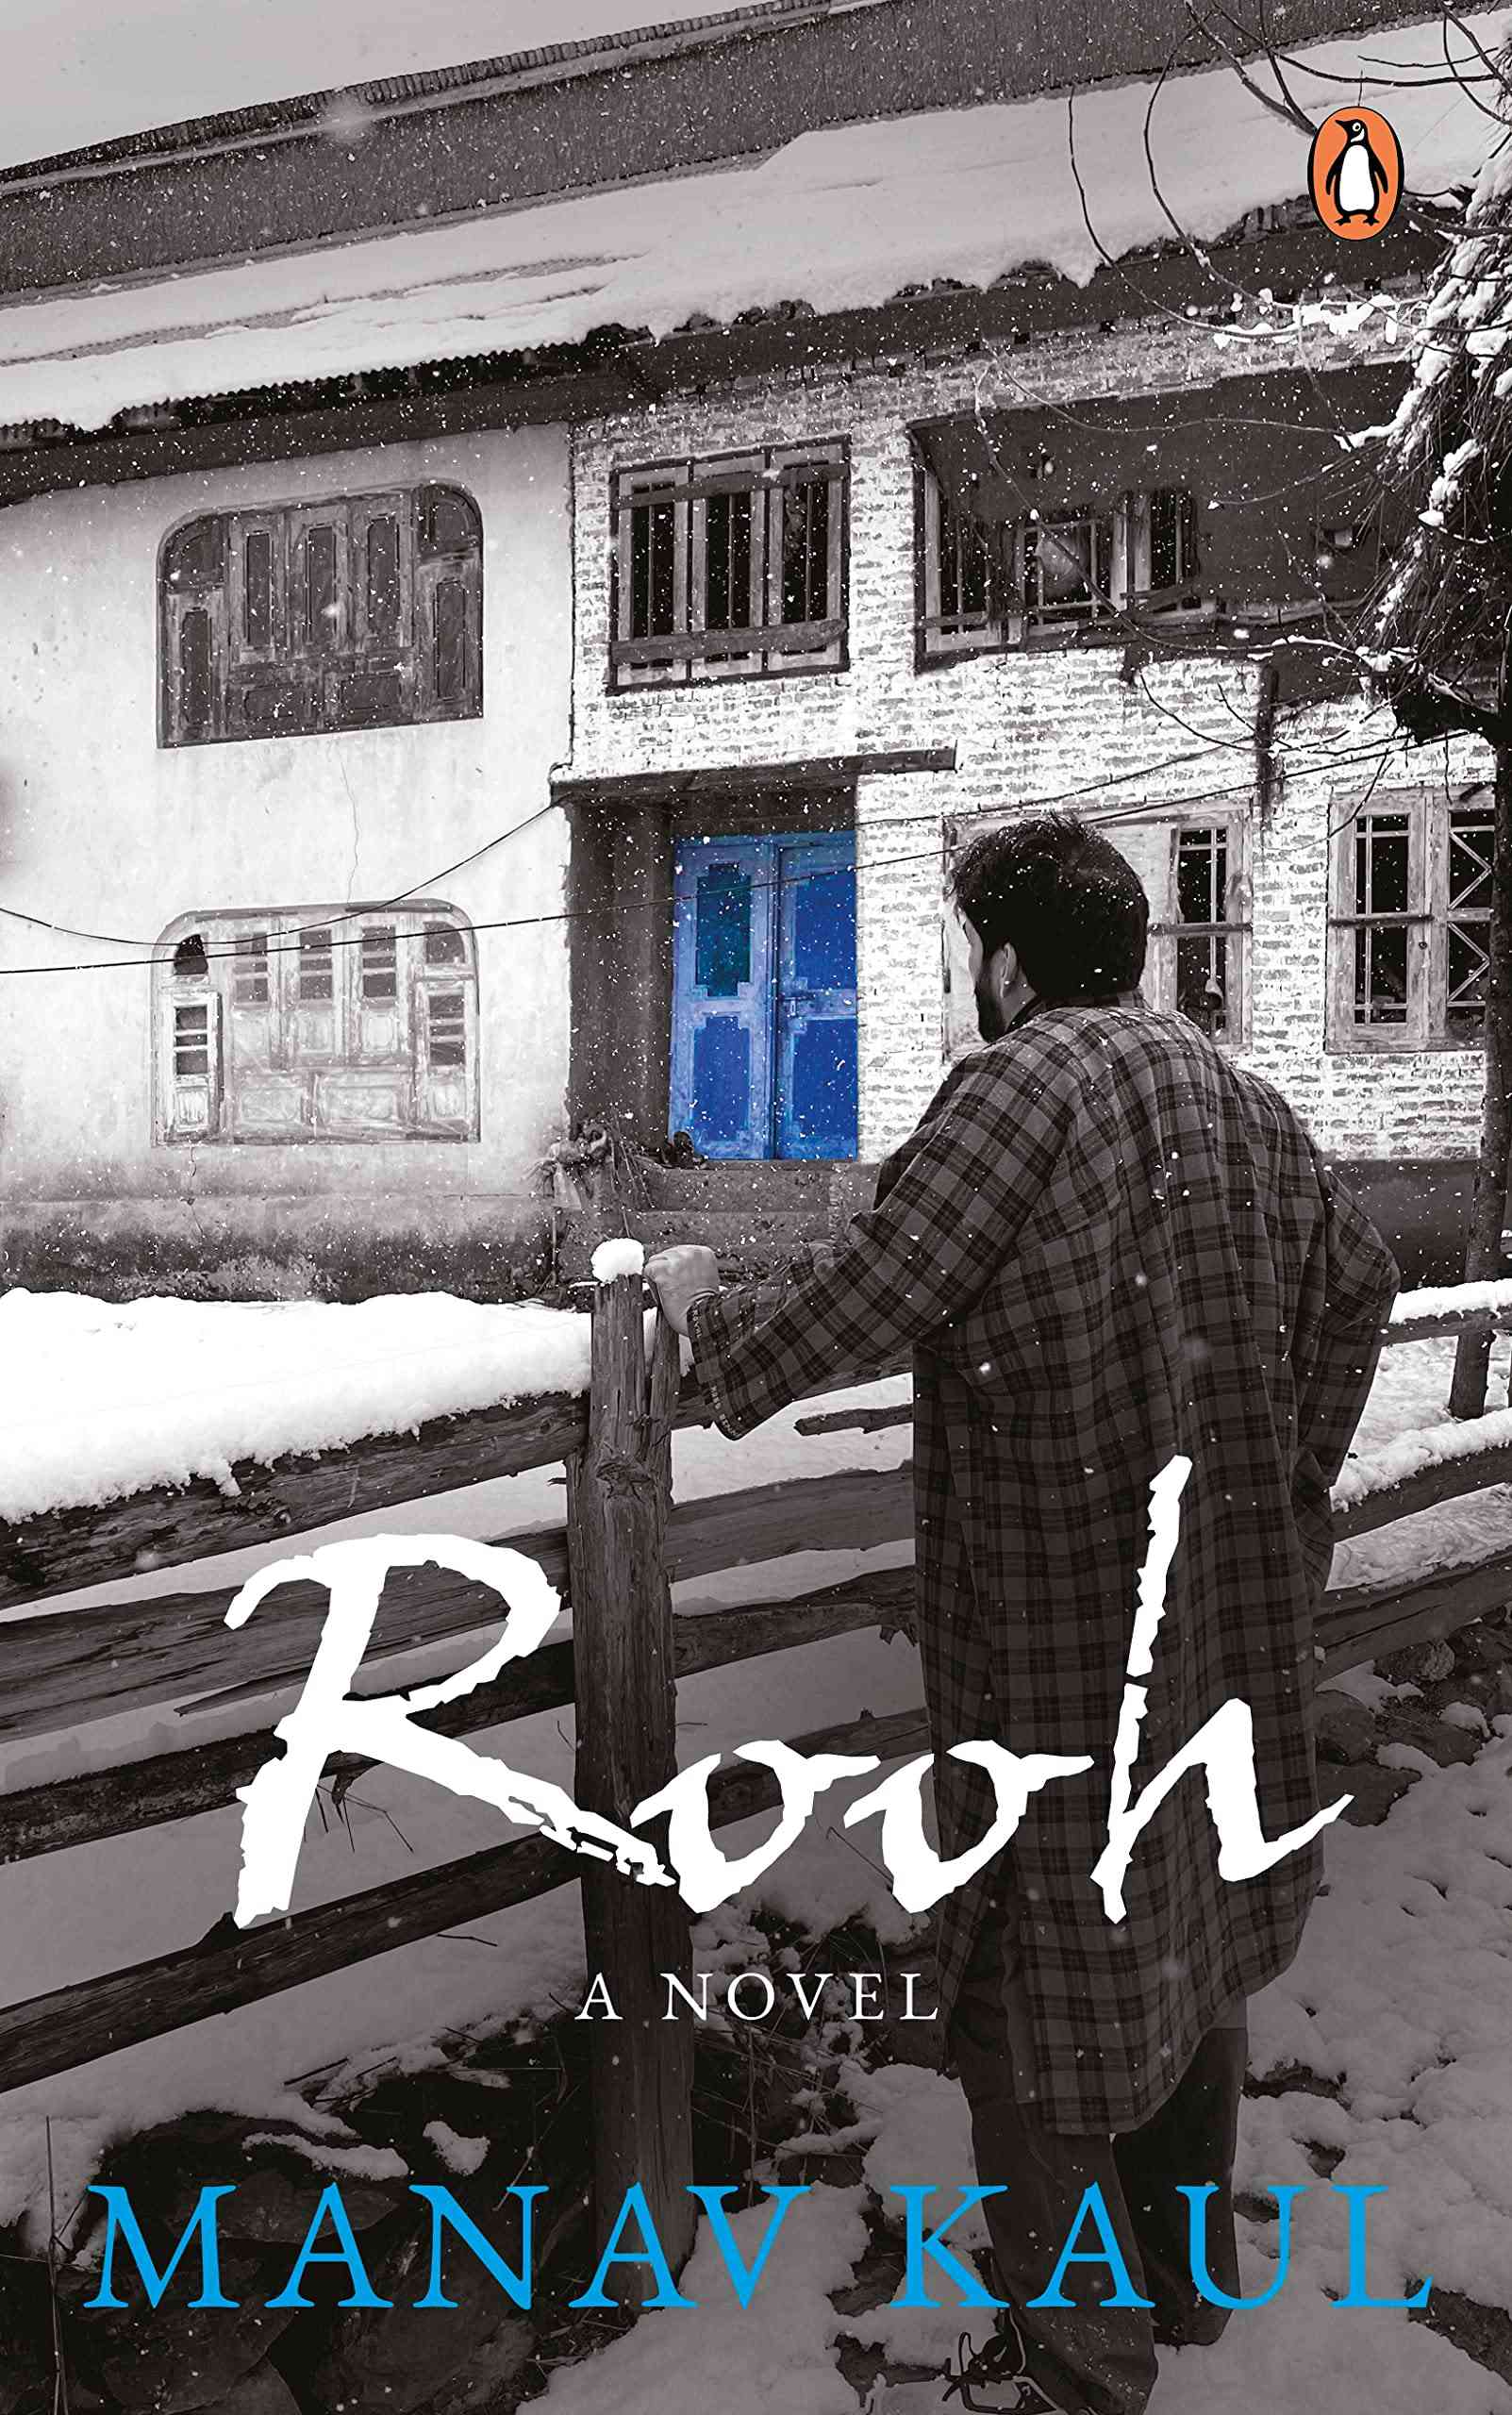 "Rooh": In actor Manav Kaul's novel, the protagonist makes a physical and metaphorical journey back to Kashmir and relives the past as a part of the present